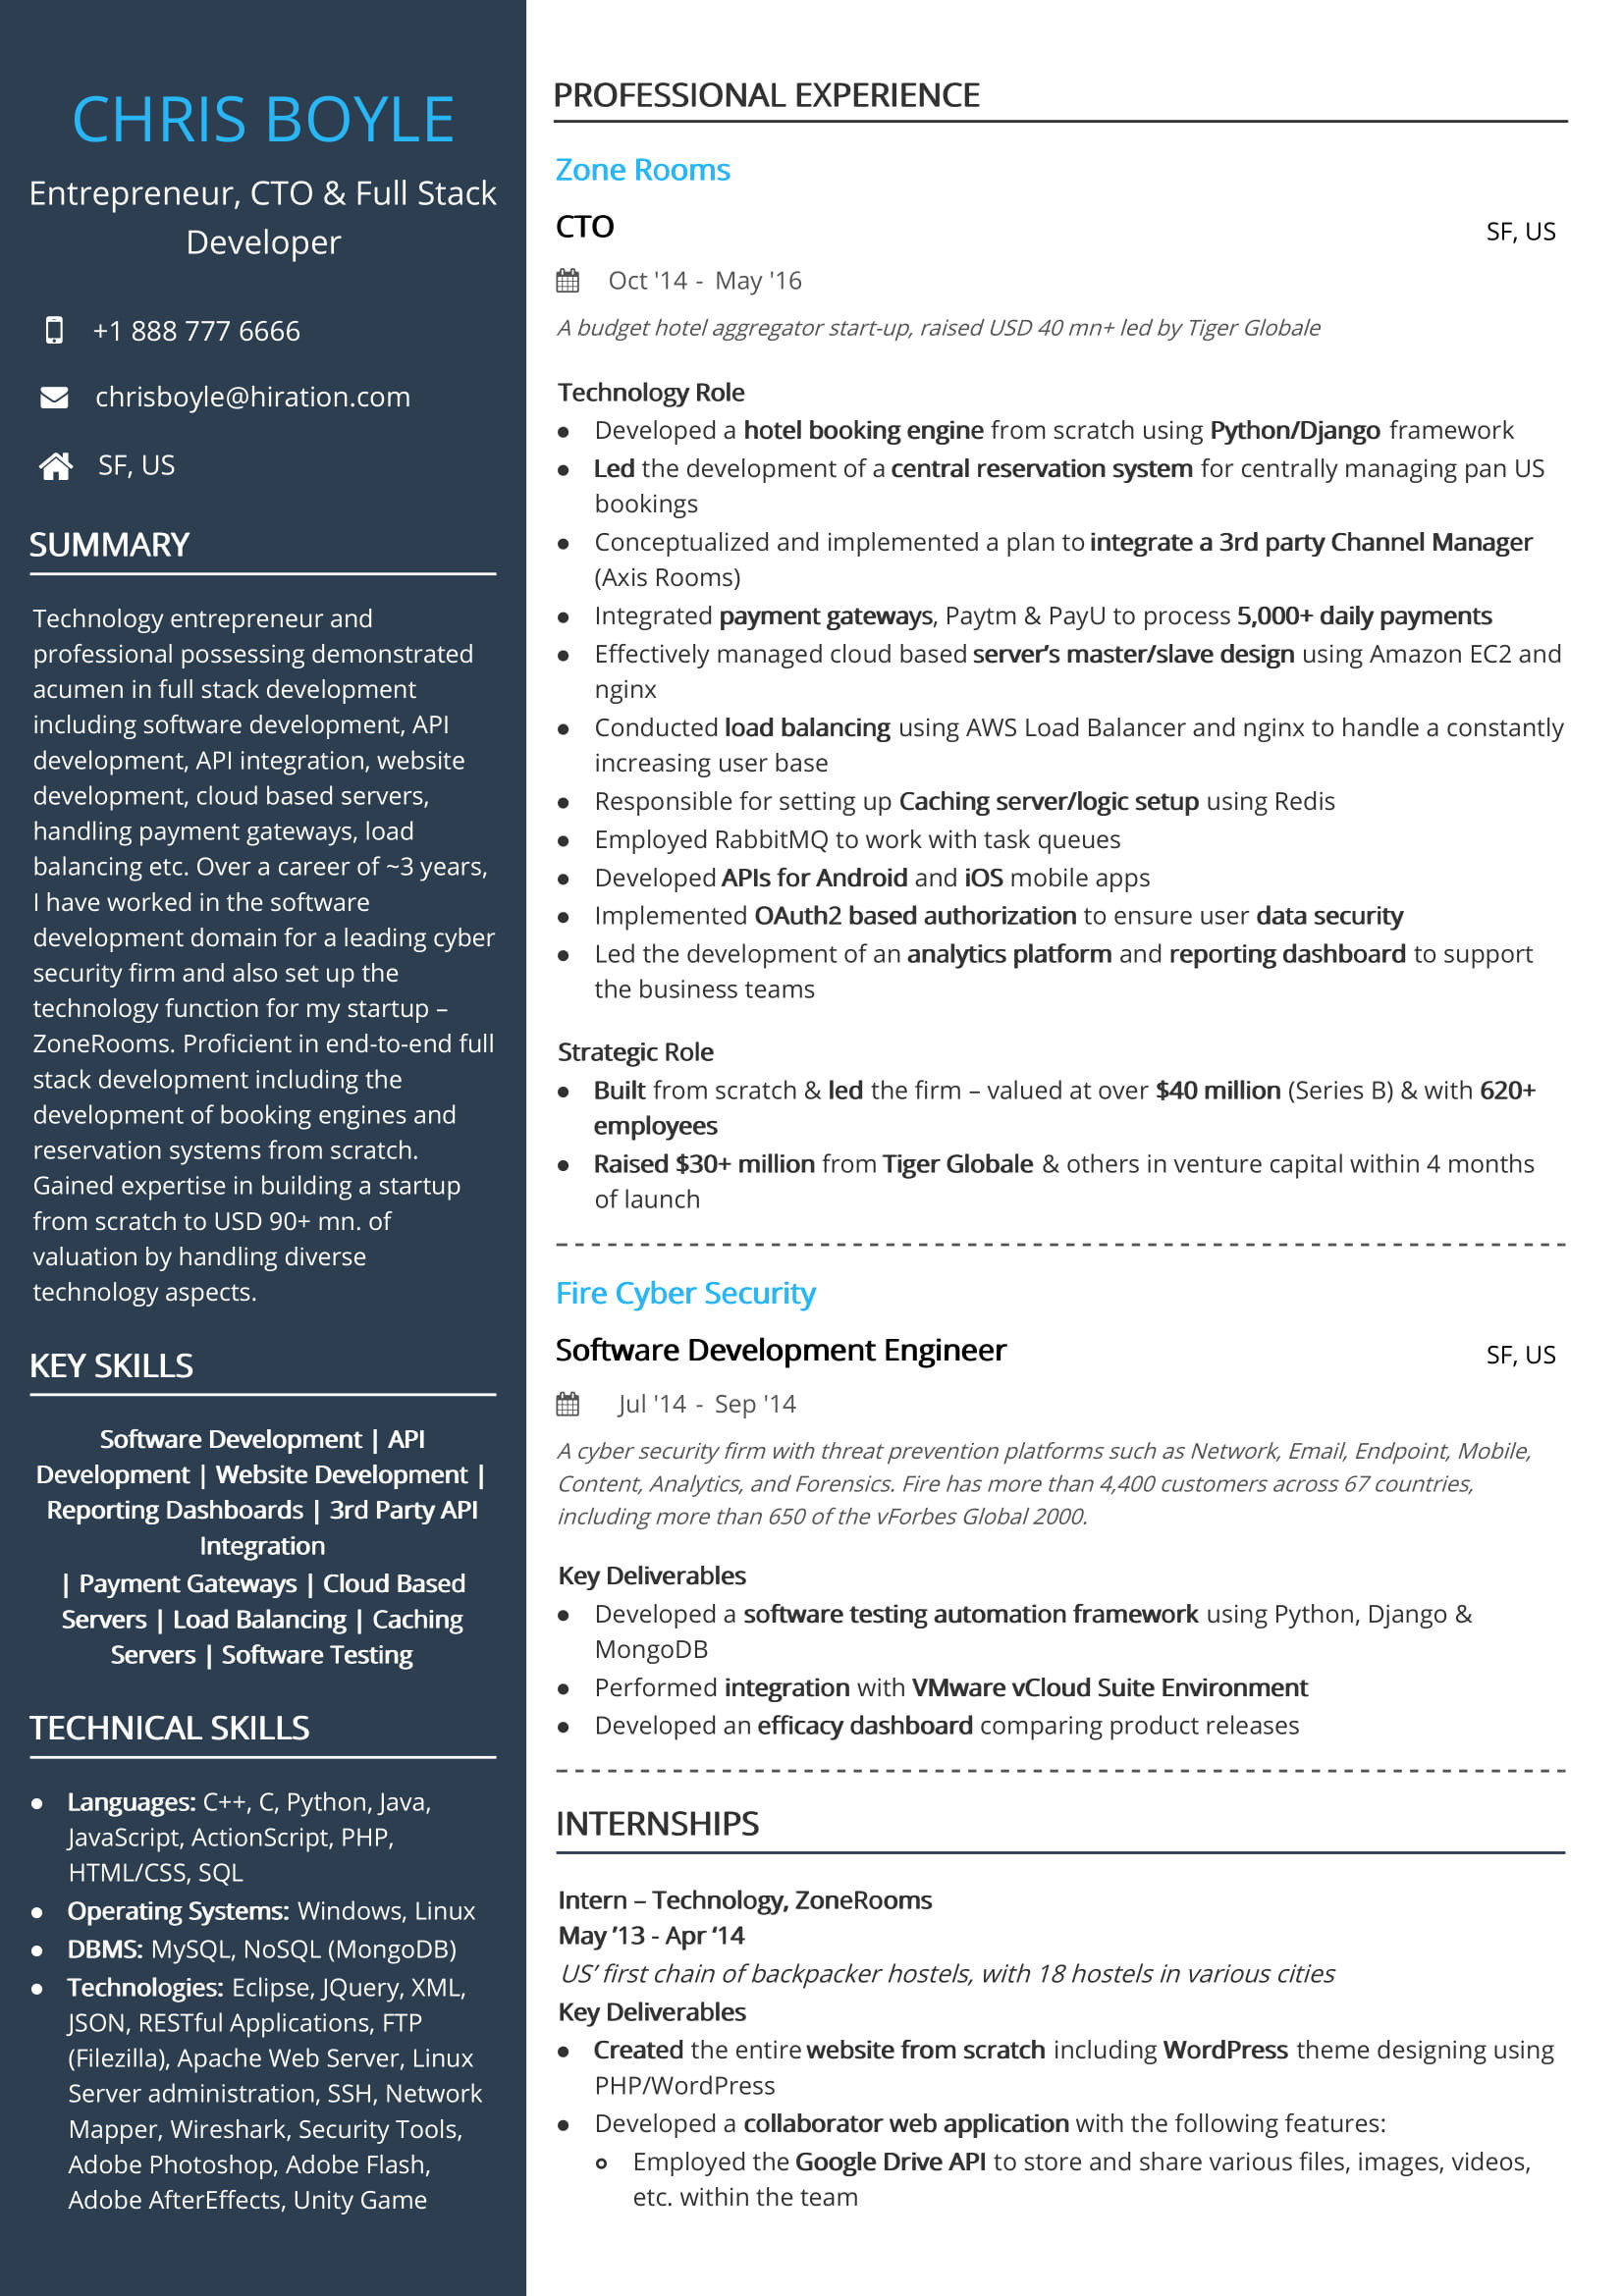 Learning and Development Specialist Resume Samples Technology Resume Examples & Resume Samples [2020]